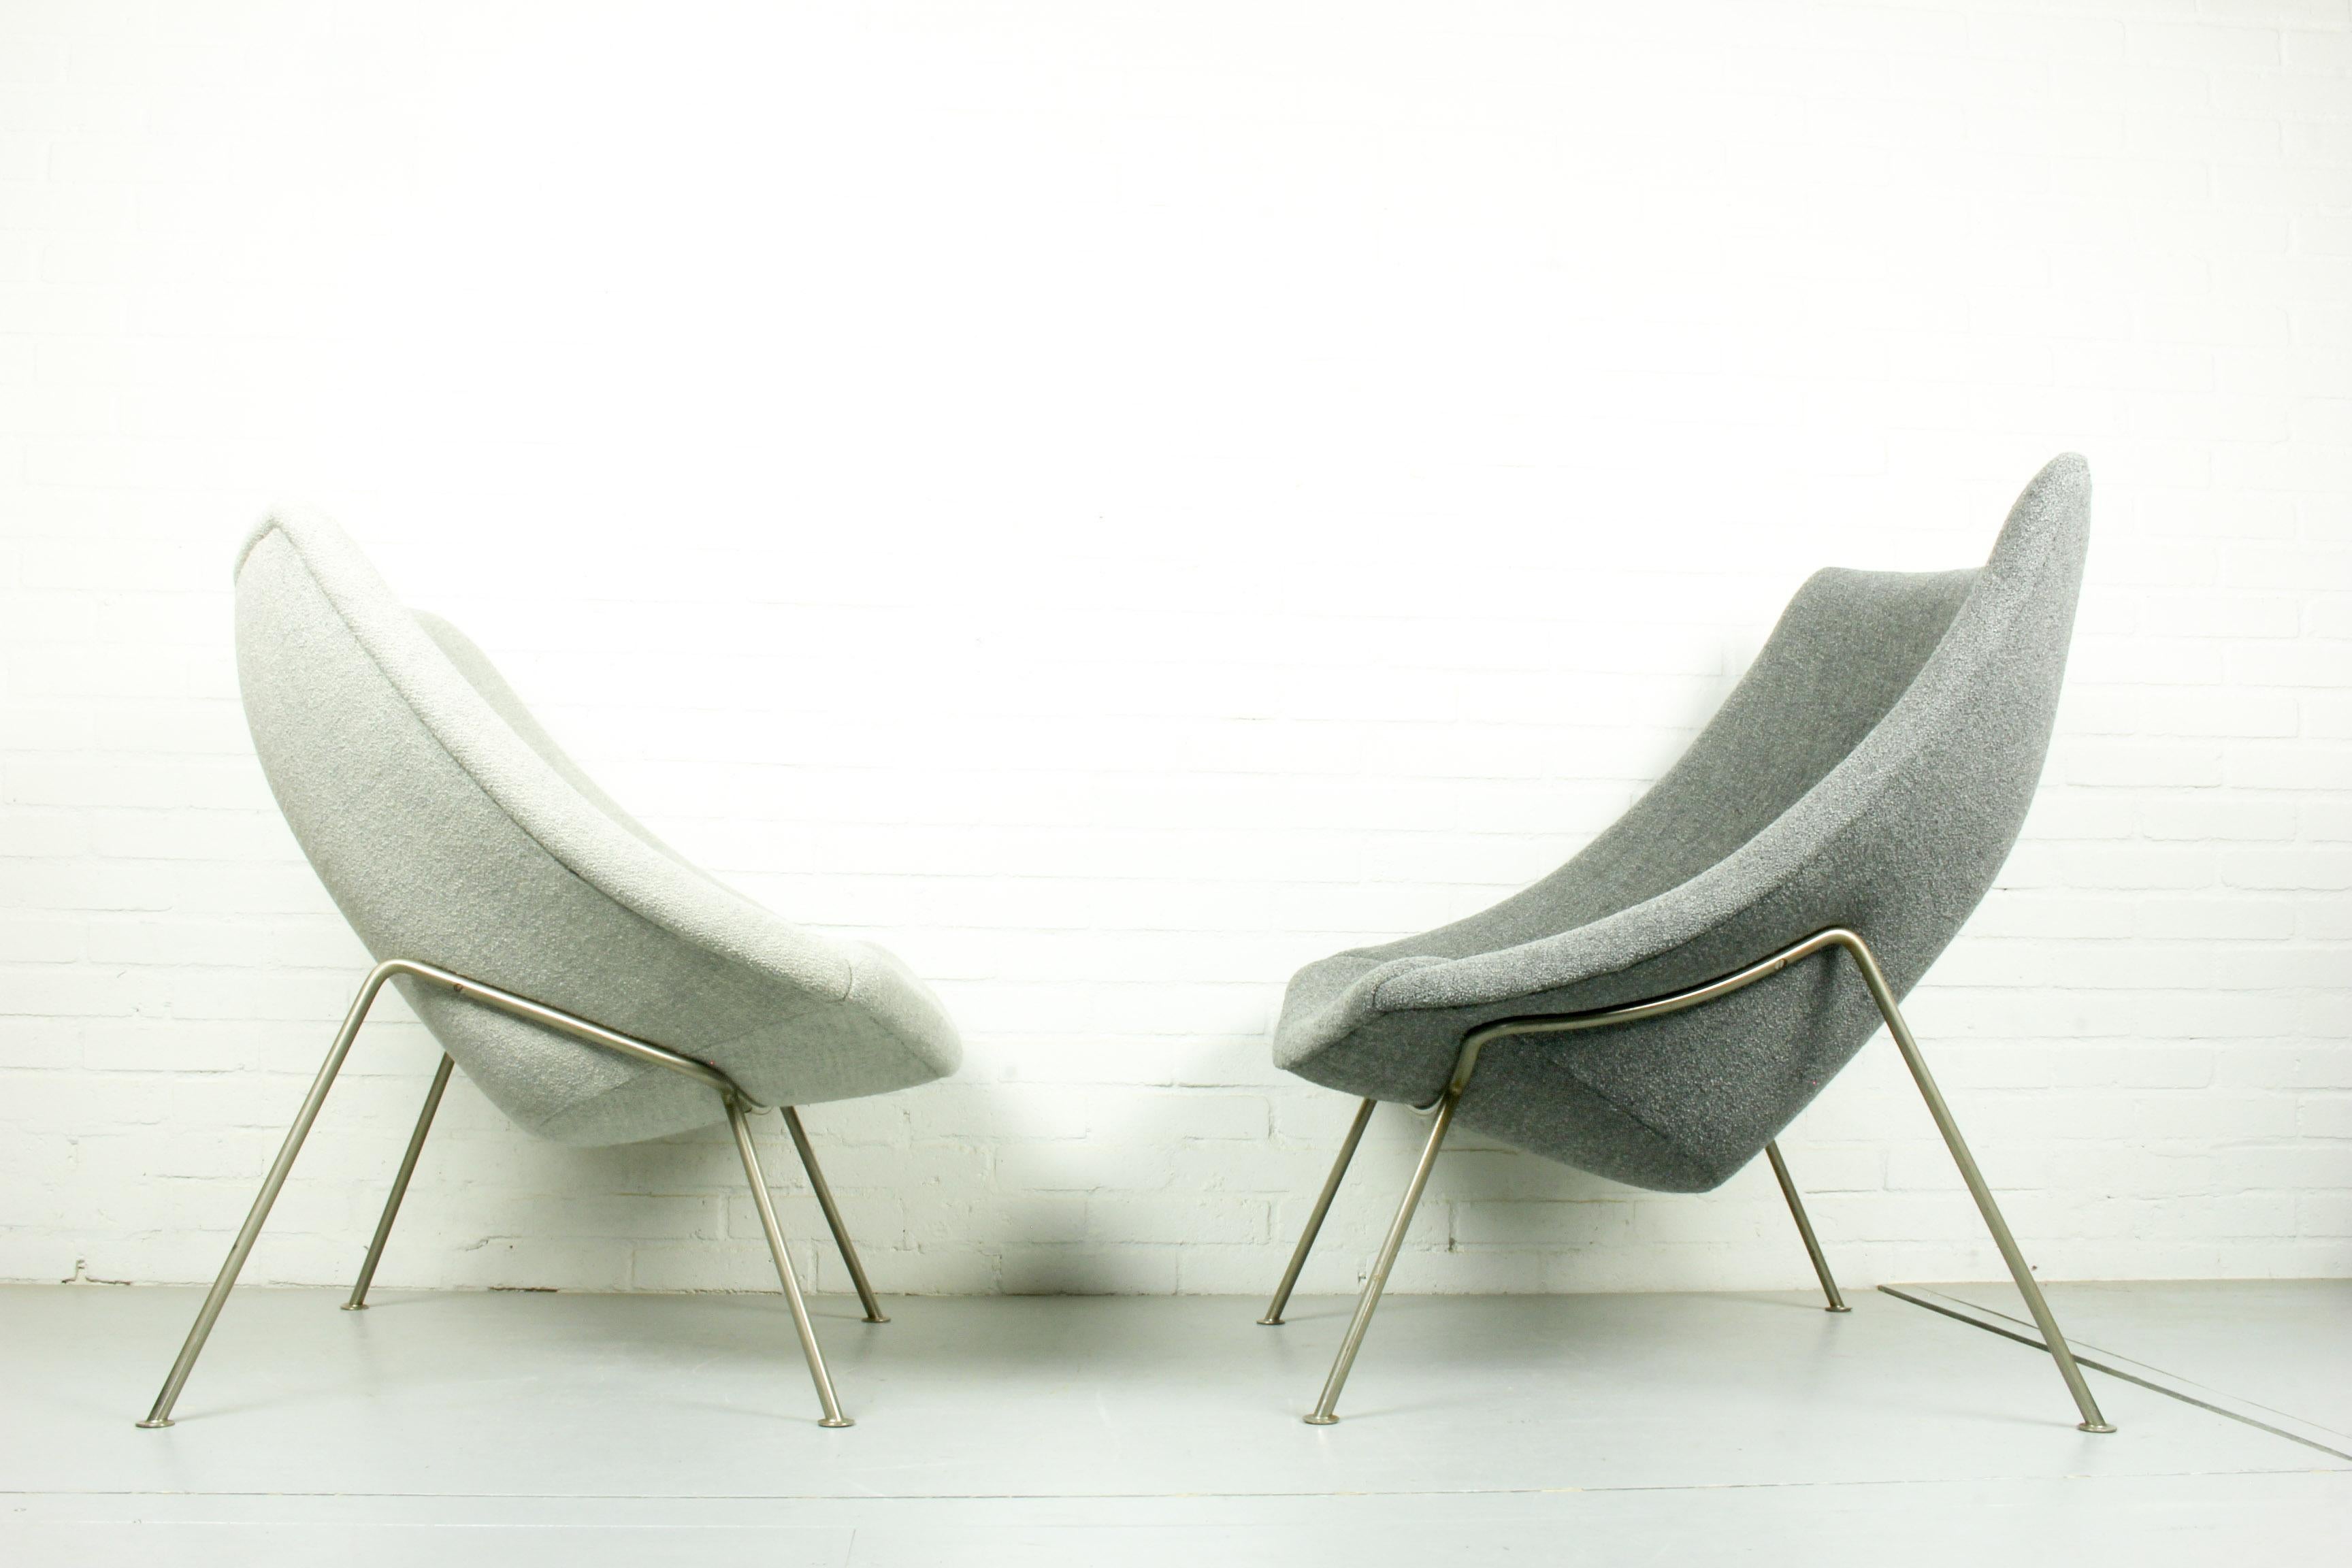 Model Oyster lounge chairs by Pierre Paulin for Artifort, Netherlands, shell covered with foam and upholstered in a beautiful Kvadrat fabric (Outback). Base made of nickel-plated steel rods. Dimensions mid grey big oyster: 88 cm H, 90cm W, 80cm D.